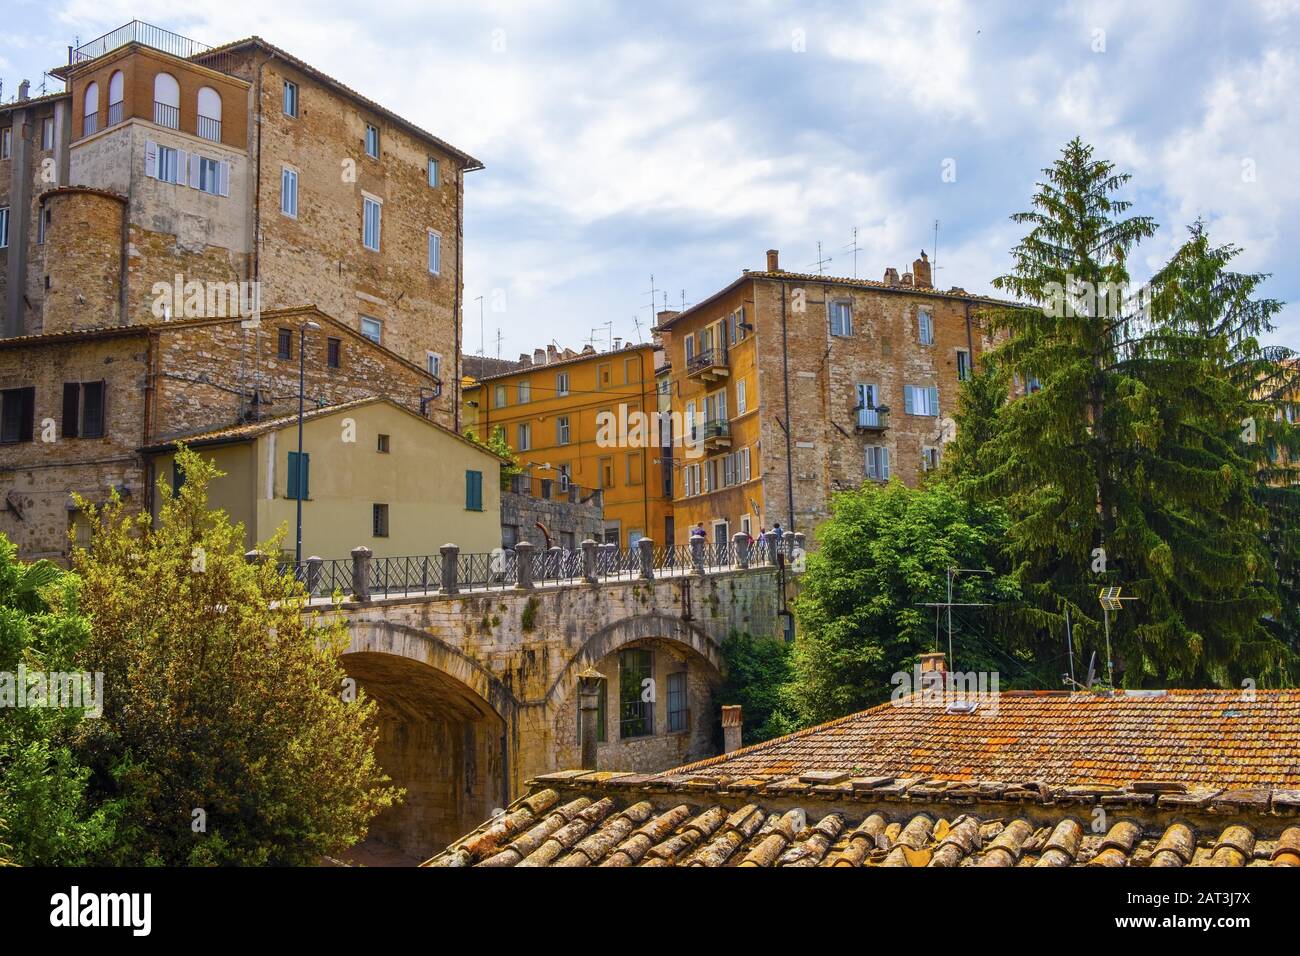 Perugia, Umbria / Italy - 2018/05/28: Panoramic view of the historic aqueduct forming Via dell Acquedotto pedestrian street along the ancient Via Appia street in Perugia historic quarter Stock Photo